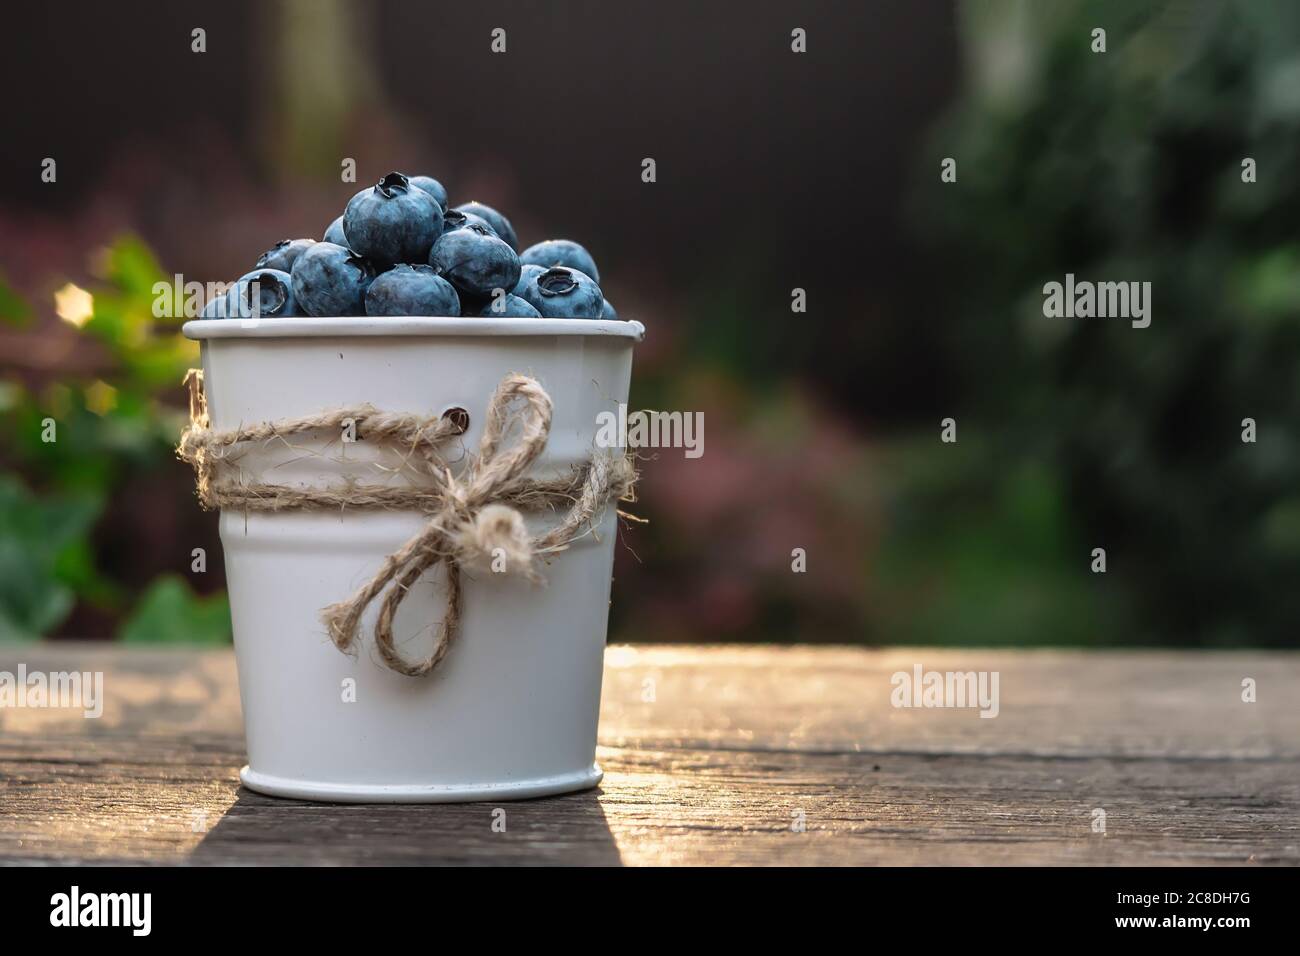 Some blueberries in a decorate small bucket on wooden banch in the garden on summer sunset, healthy food concept Stock Photo